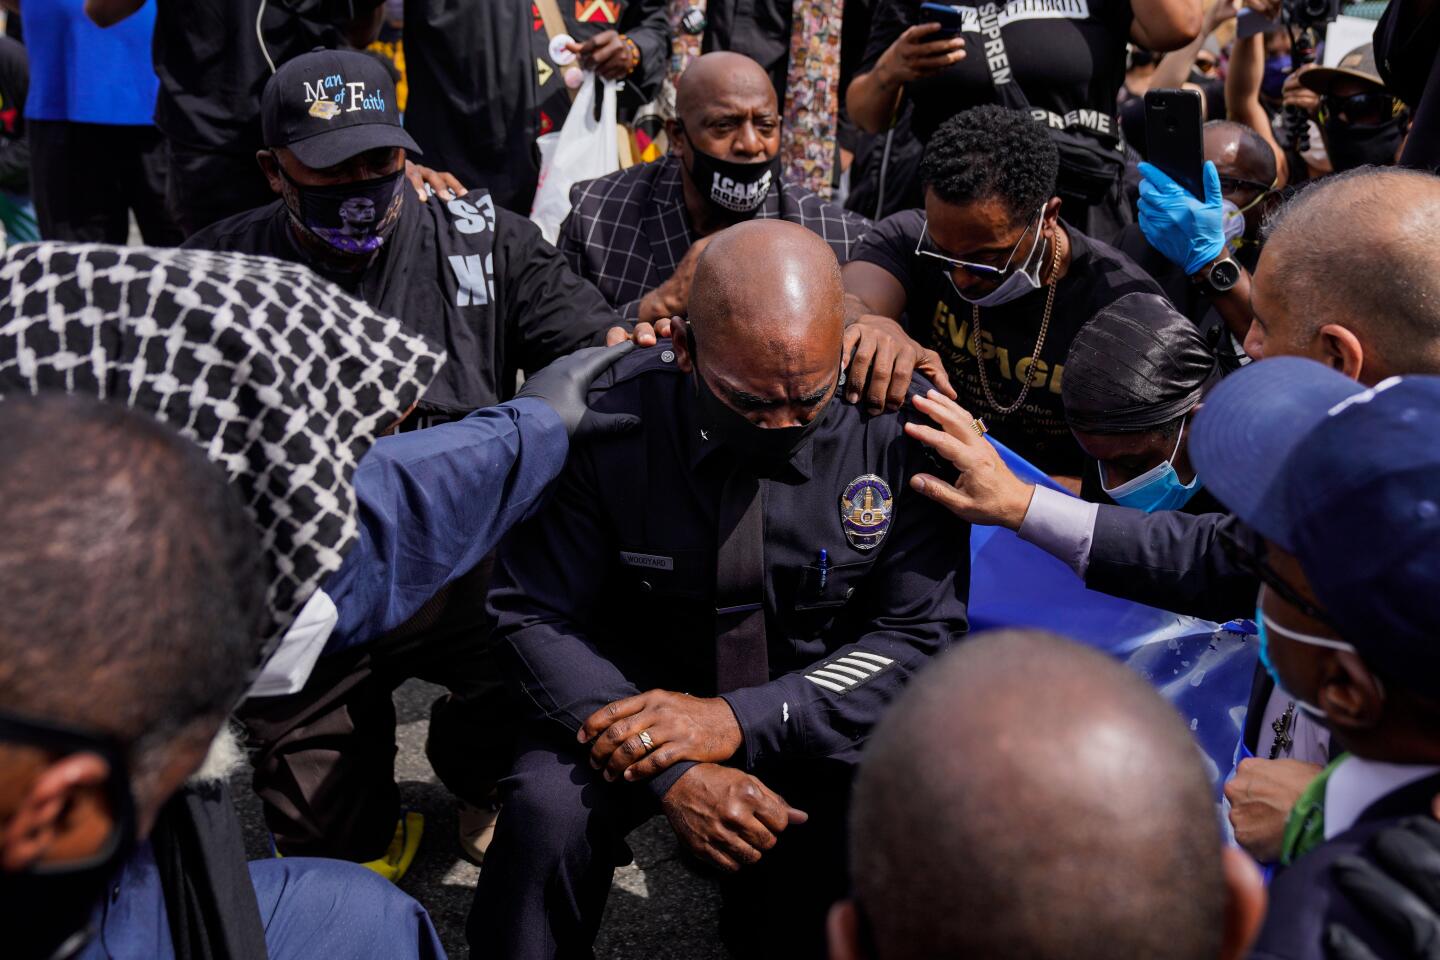 LAPD Cmdr. Gerald Woodyard takes a knee with clergy members from the Los Angeles area